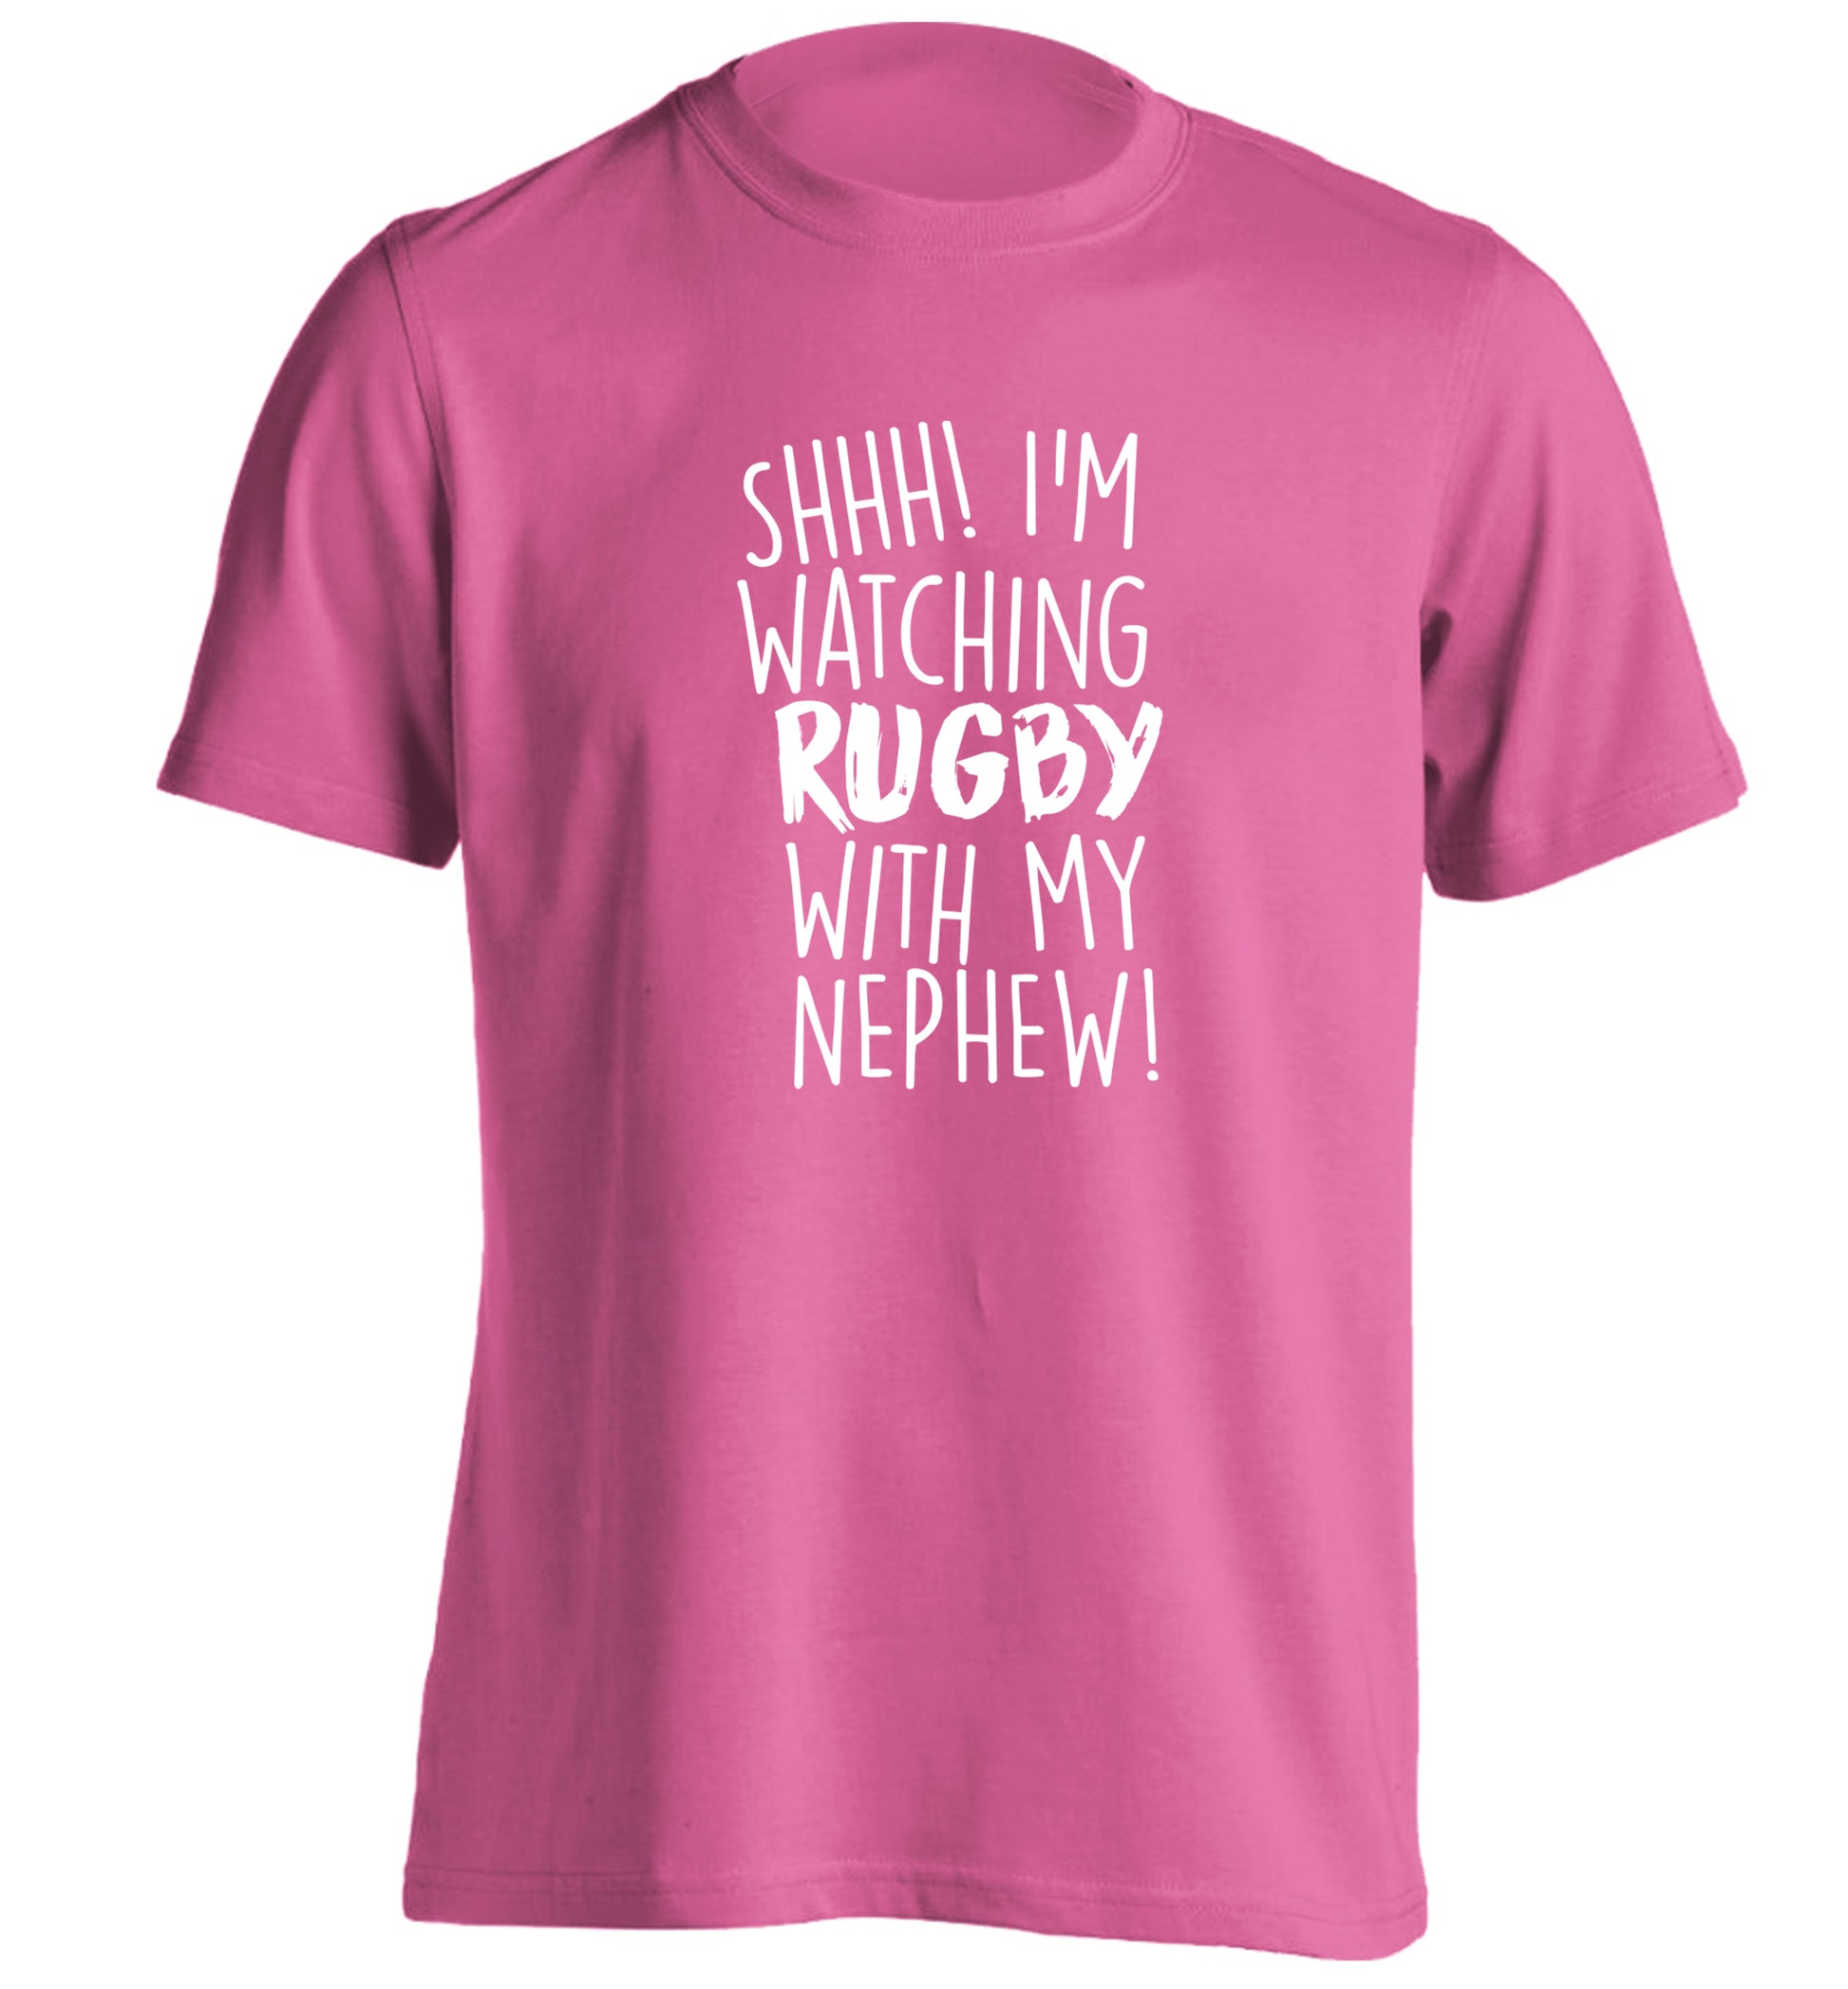 Shh.. I'm watching rugby with my nephew adults unisex pink Tshirt 2XL